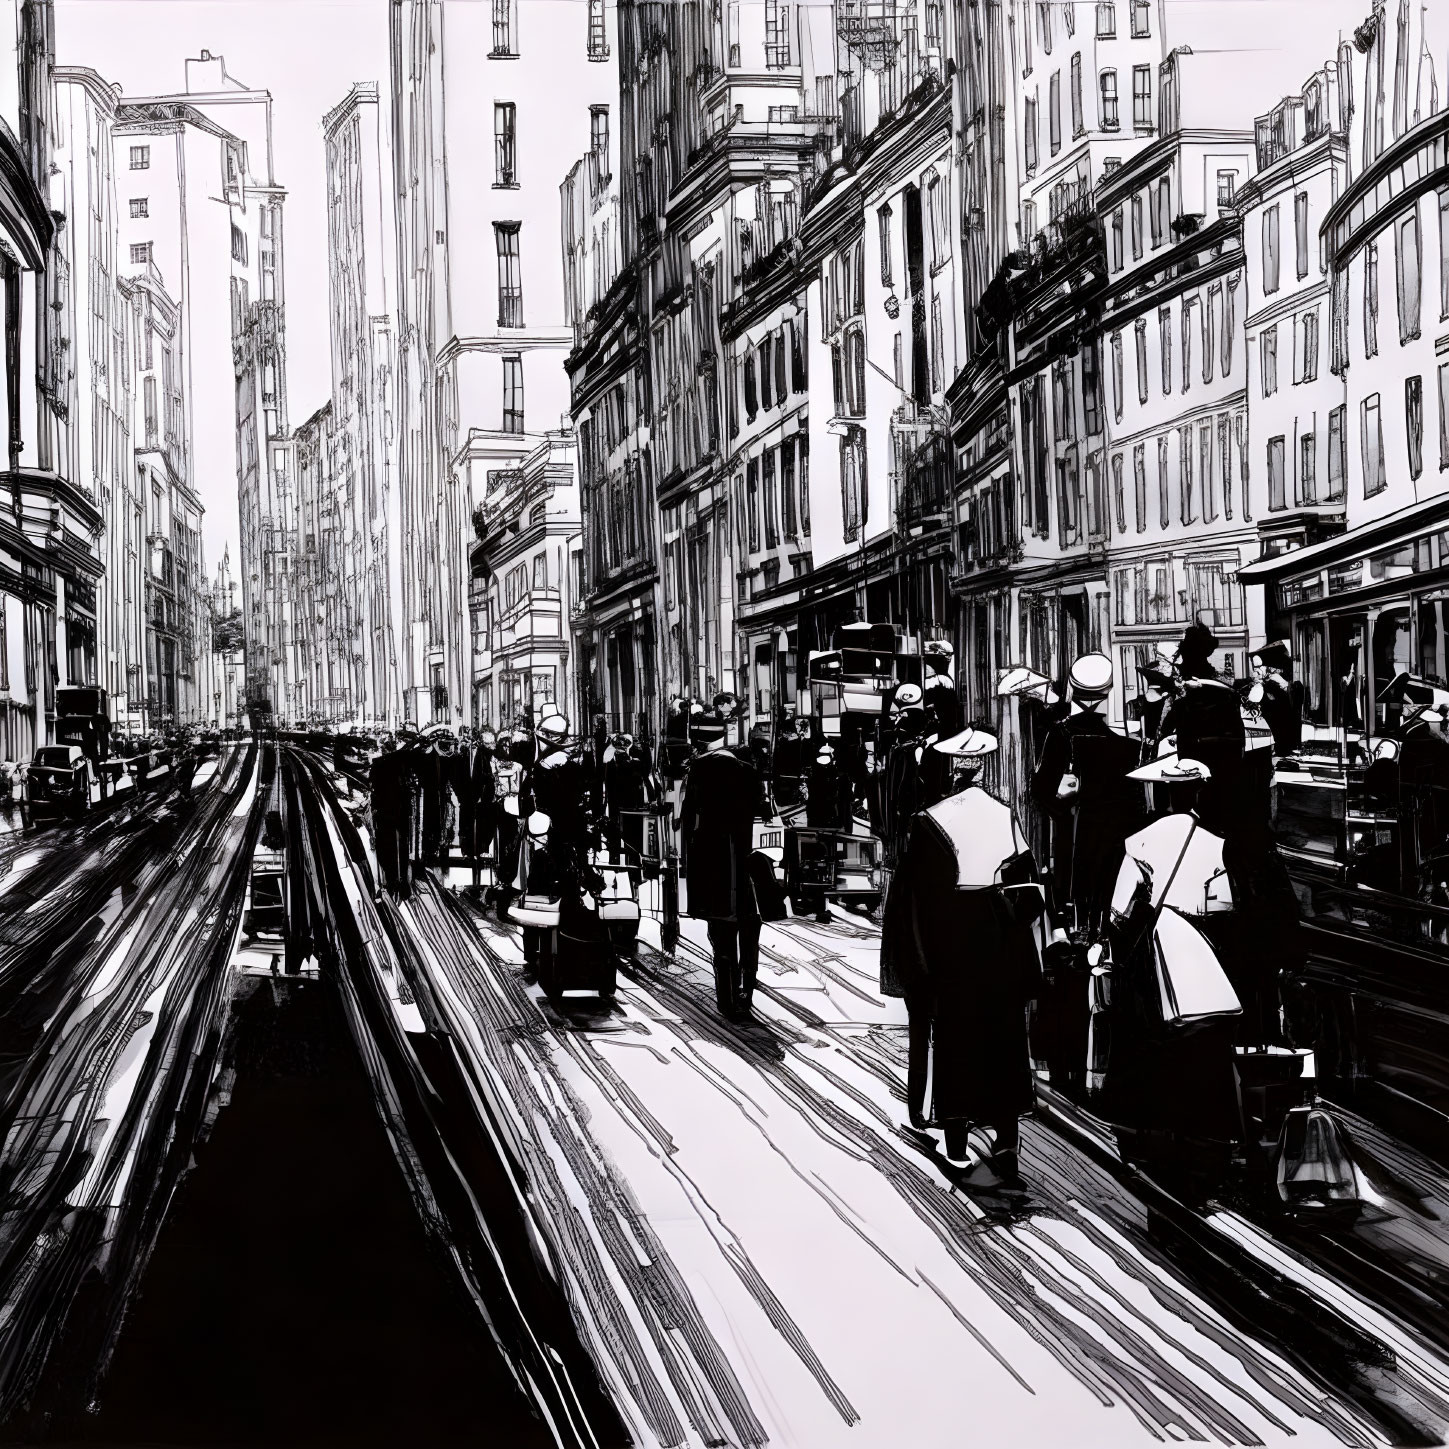 Monochrome cityscape sketch with pedestrians, vintage cars, and tall buildings